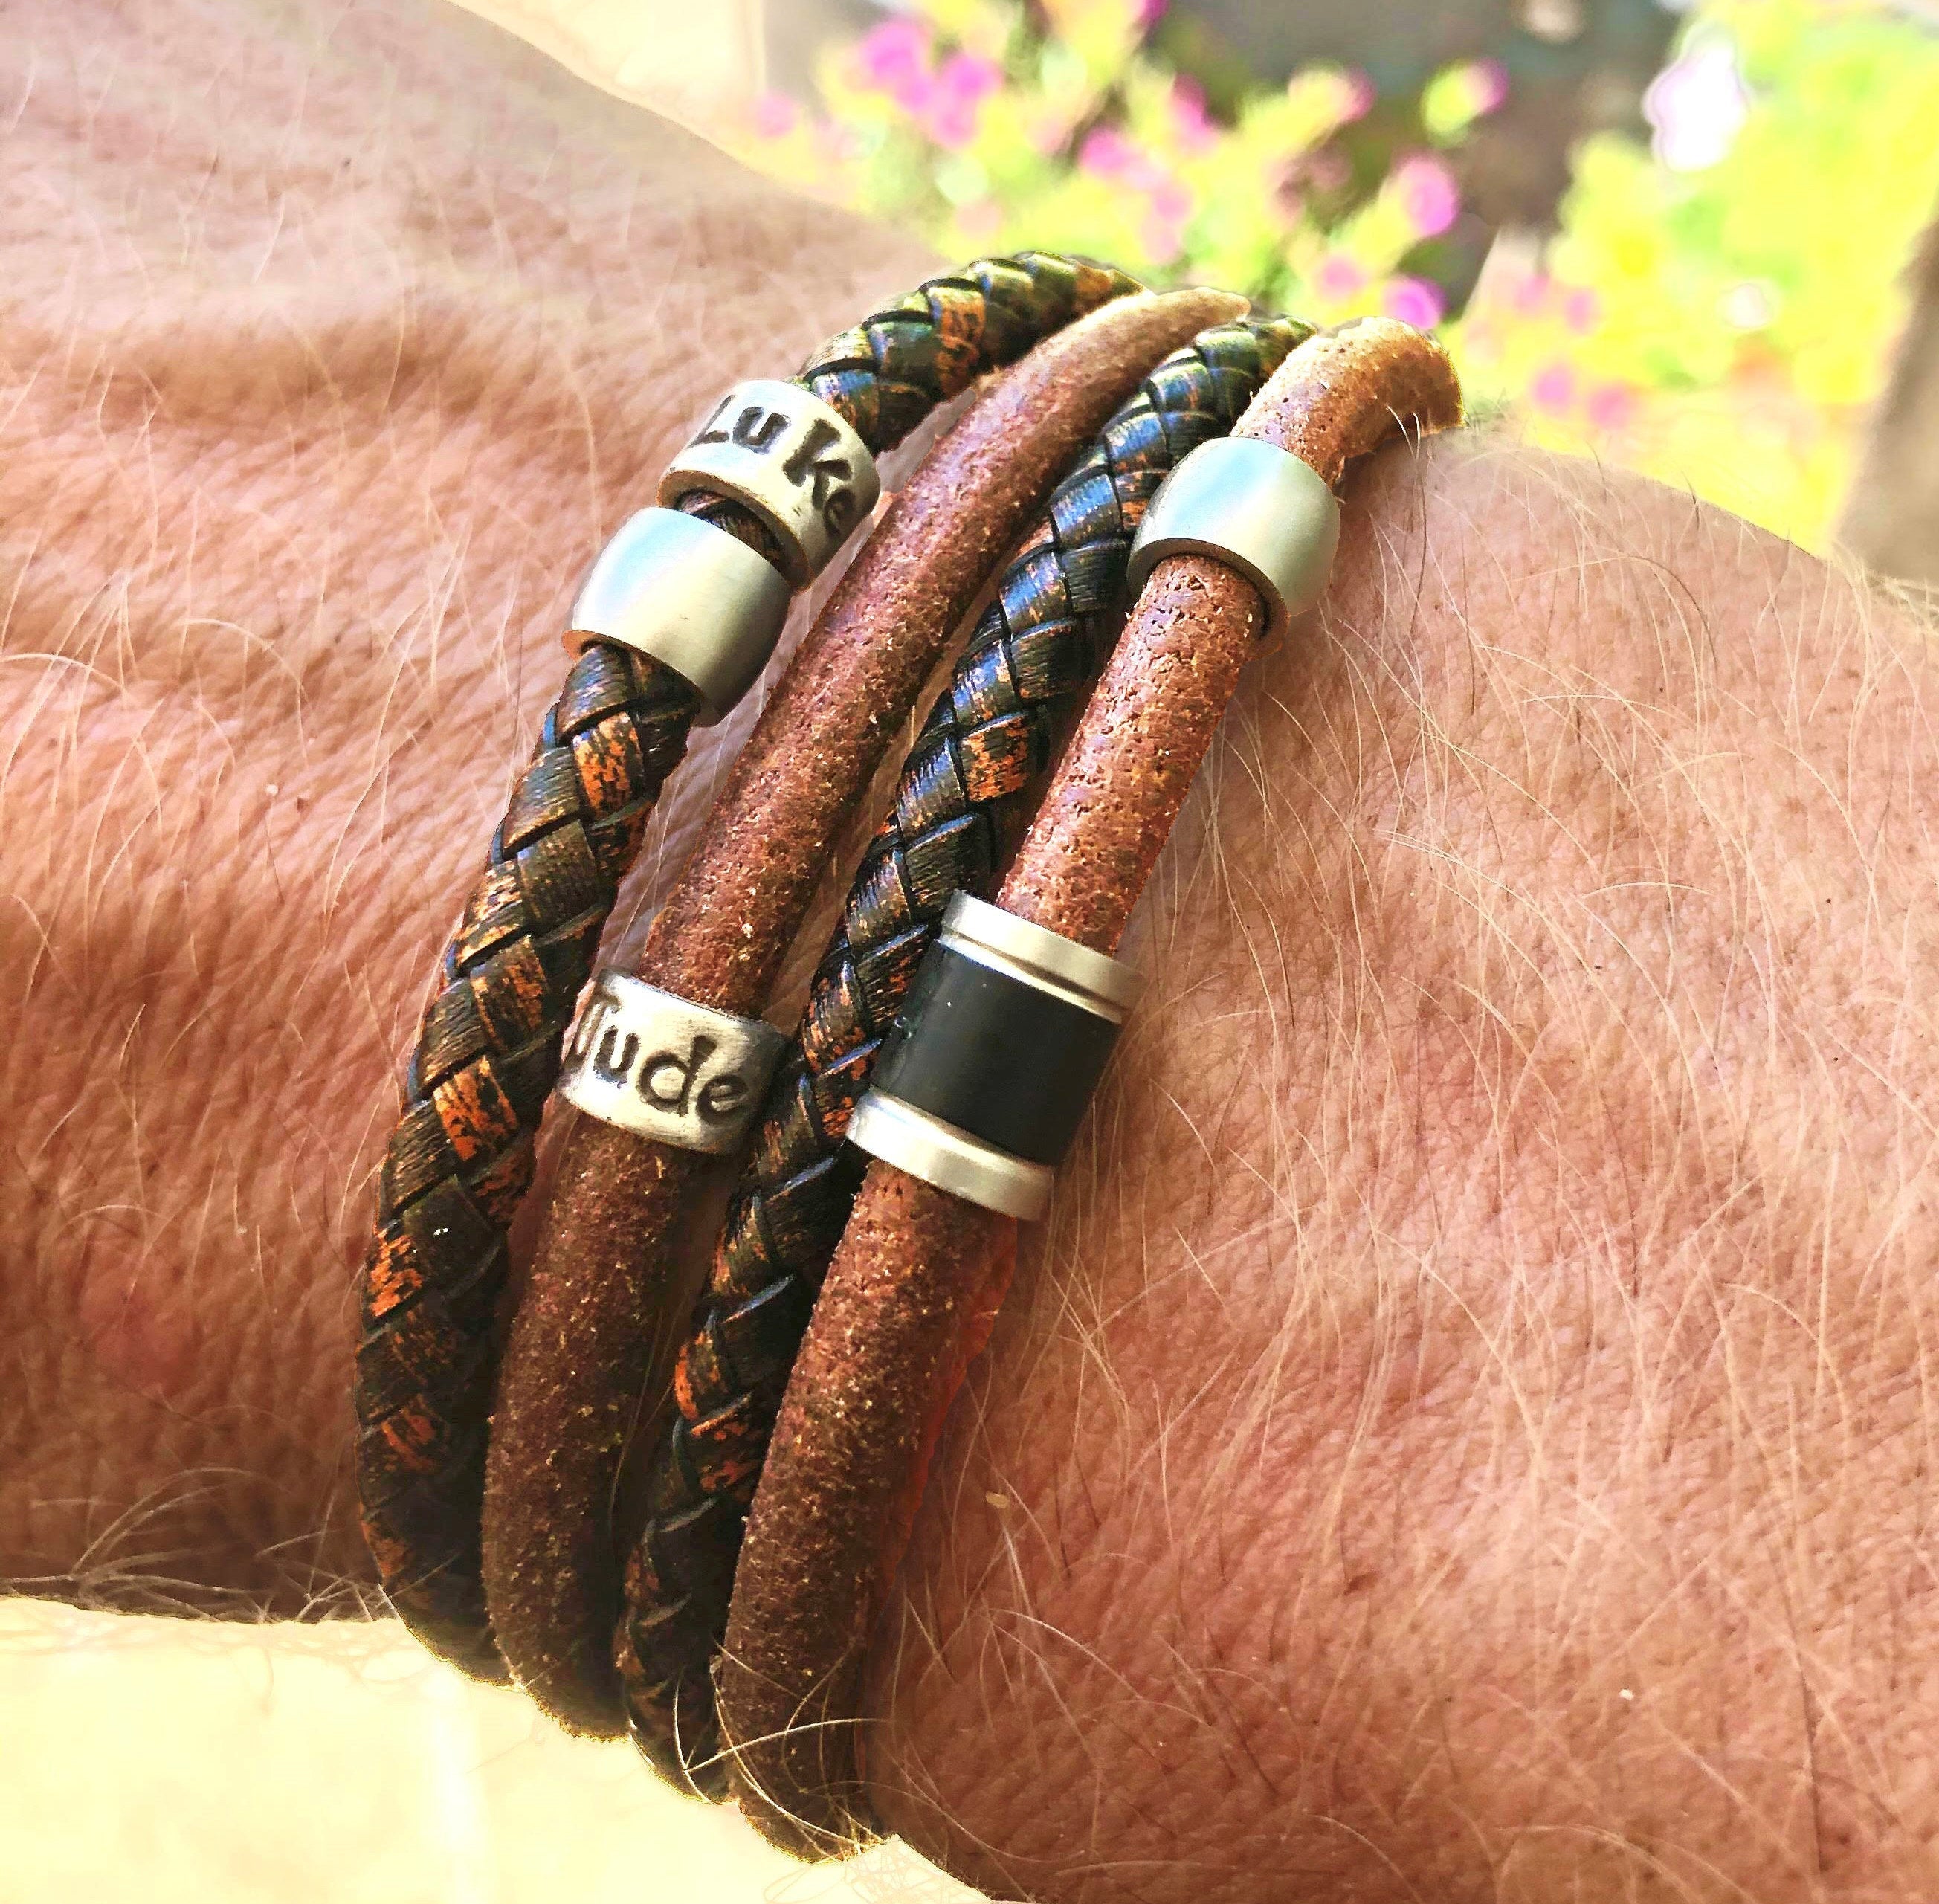 Braided Leather Bracelet With Kids' Names | Rugged Gifts